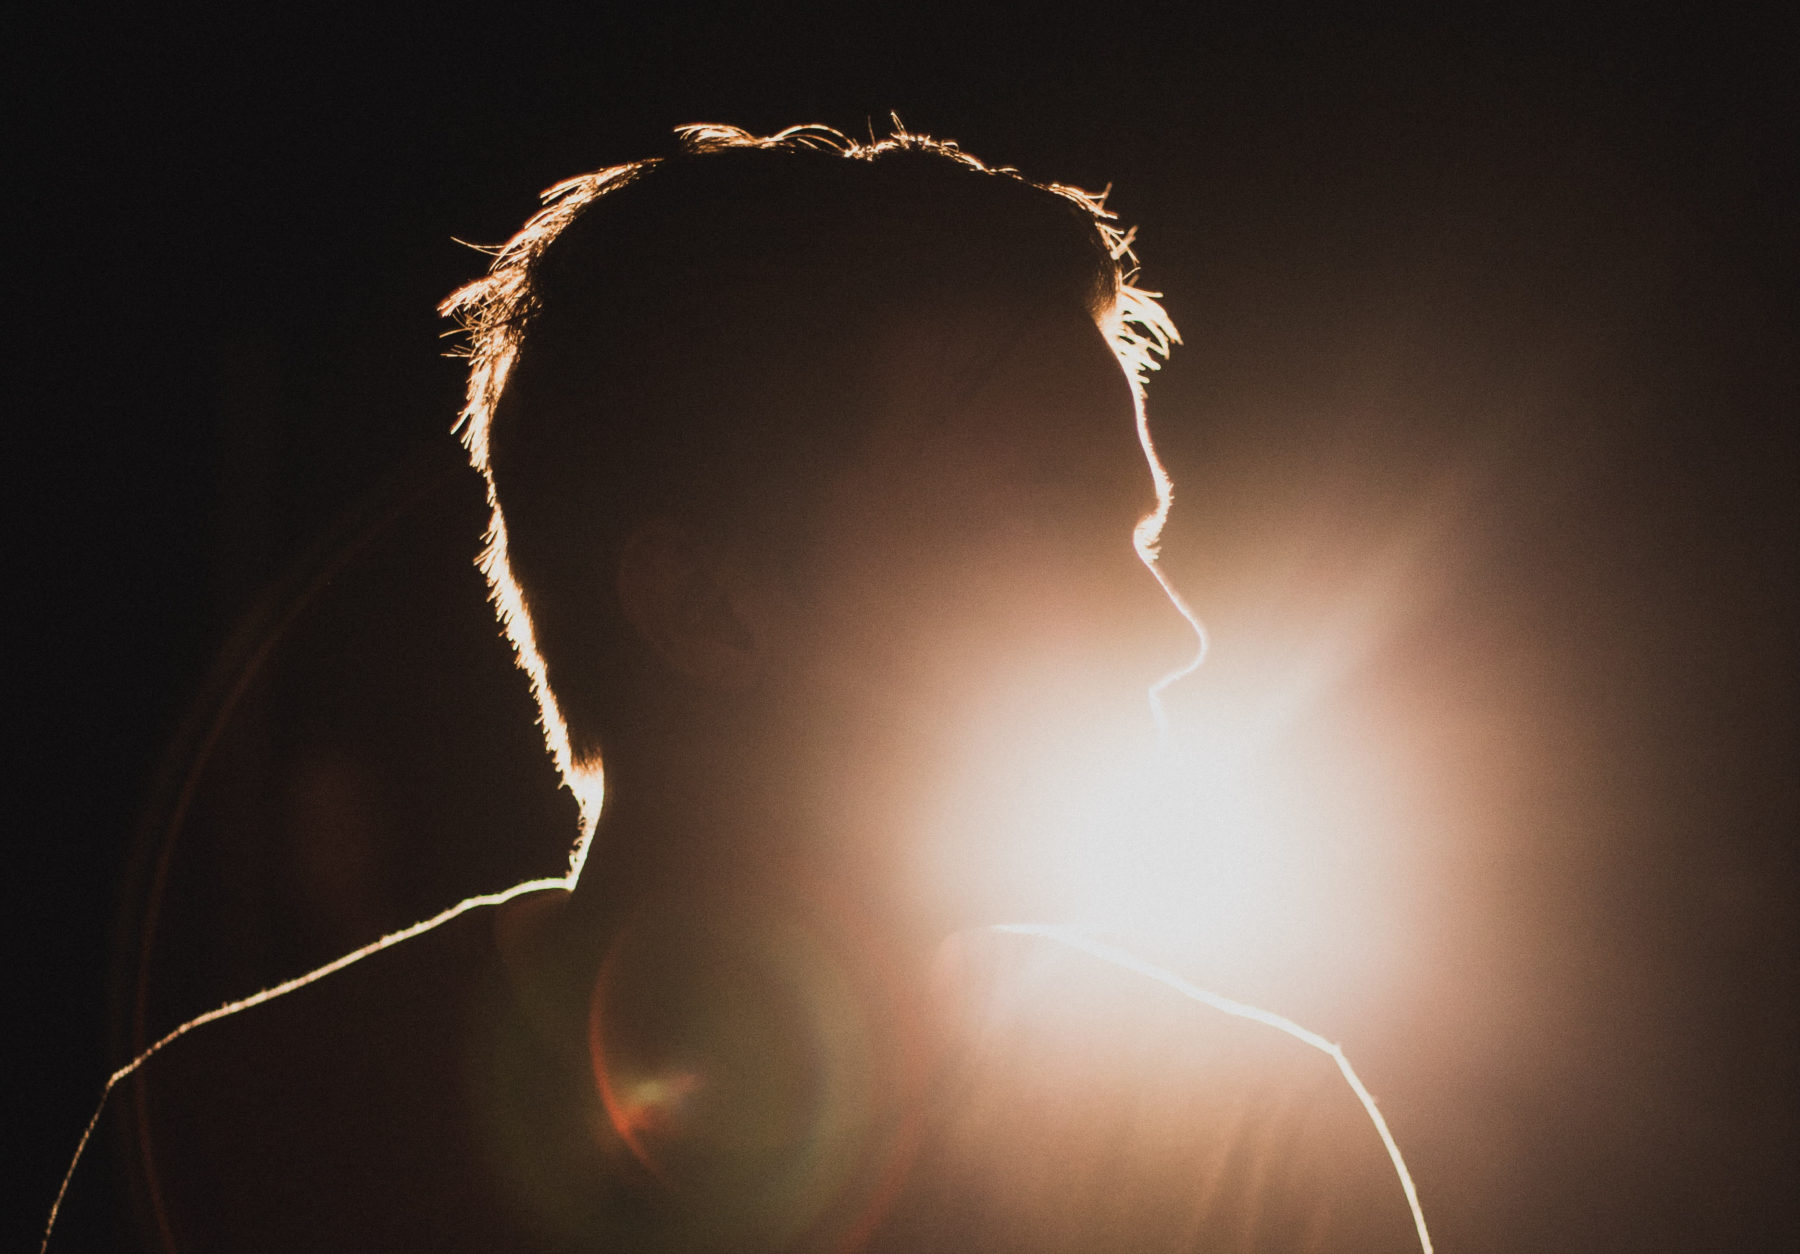 A silhouette of a man being lit up by a light in the background.